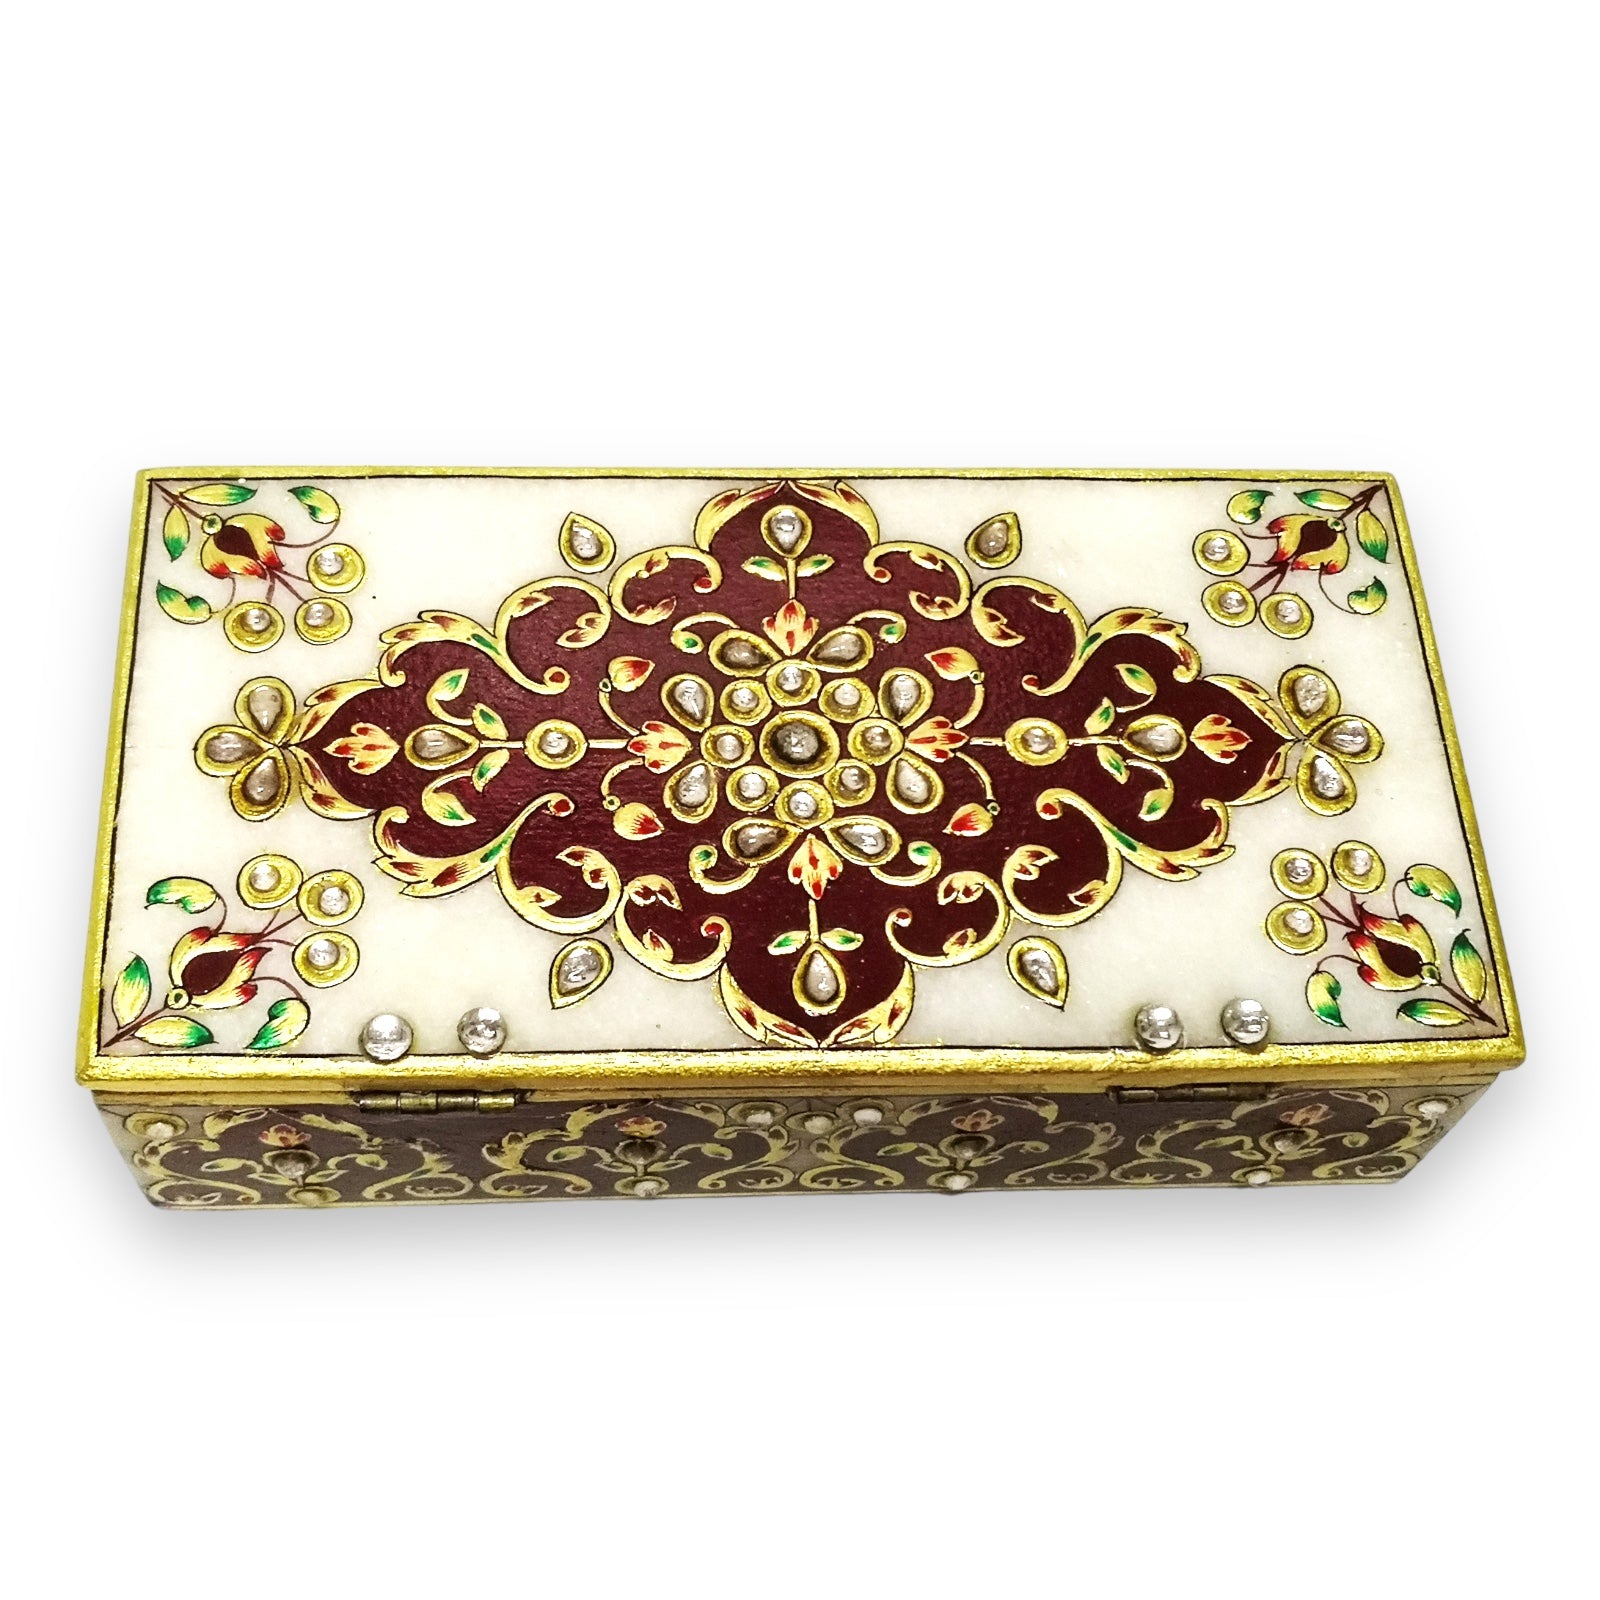 Marble 24K Gold Handcrafted Jewelry Box